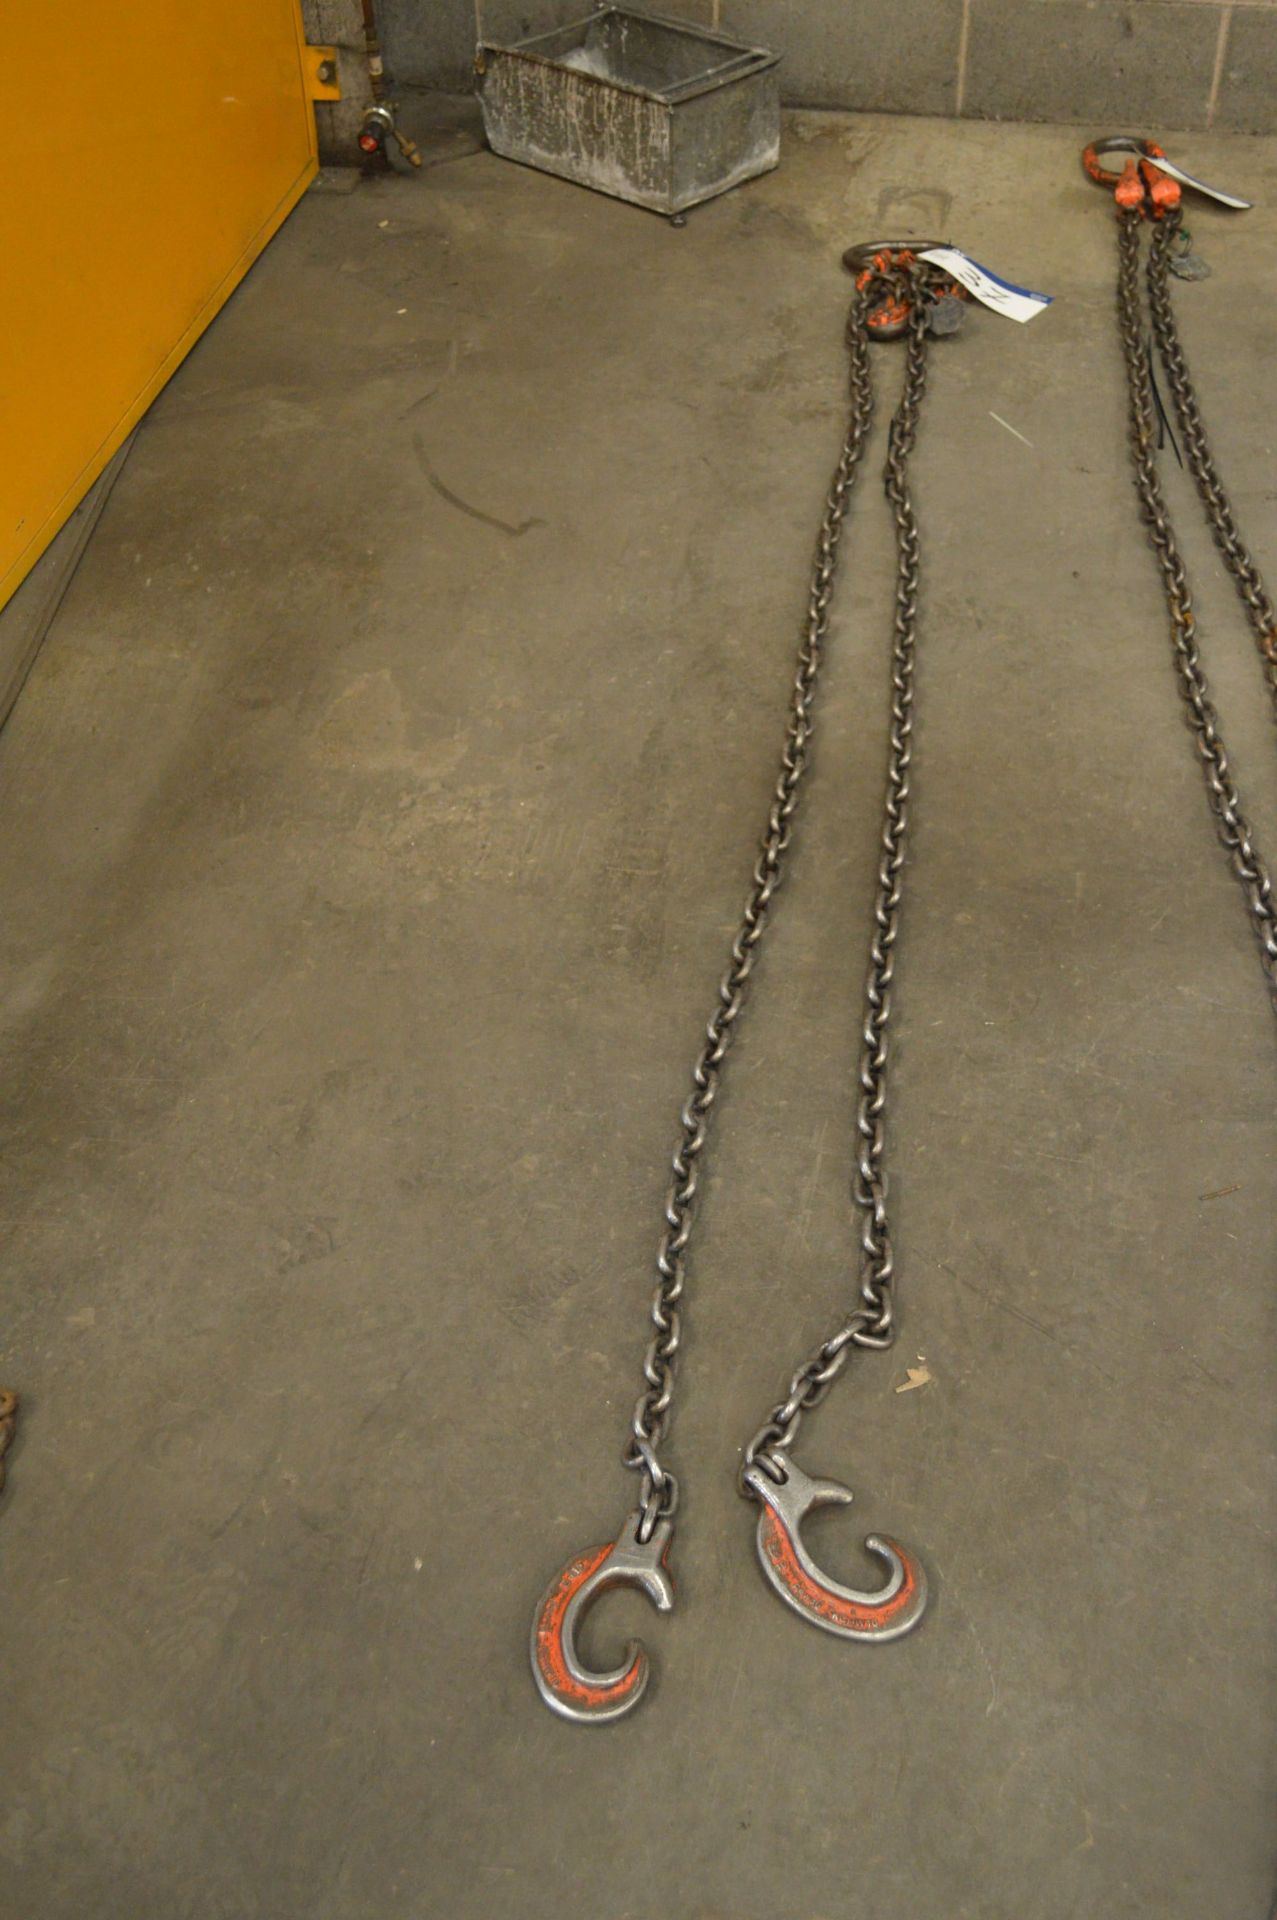 Pewag Two Leg Chain Sling, approx. 2.5m long, with tensioners